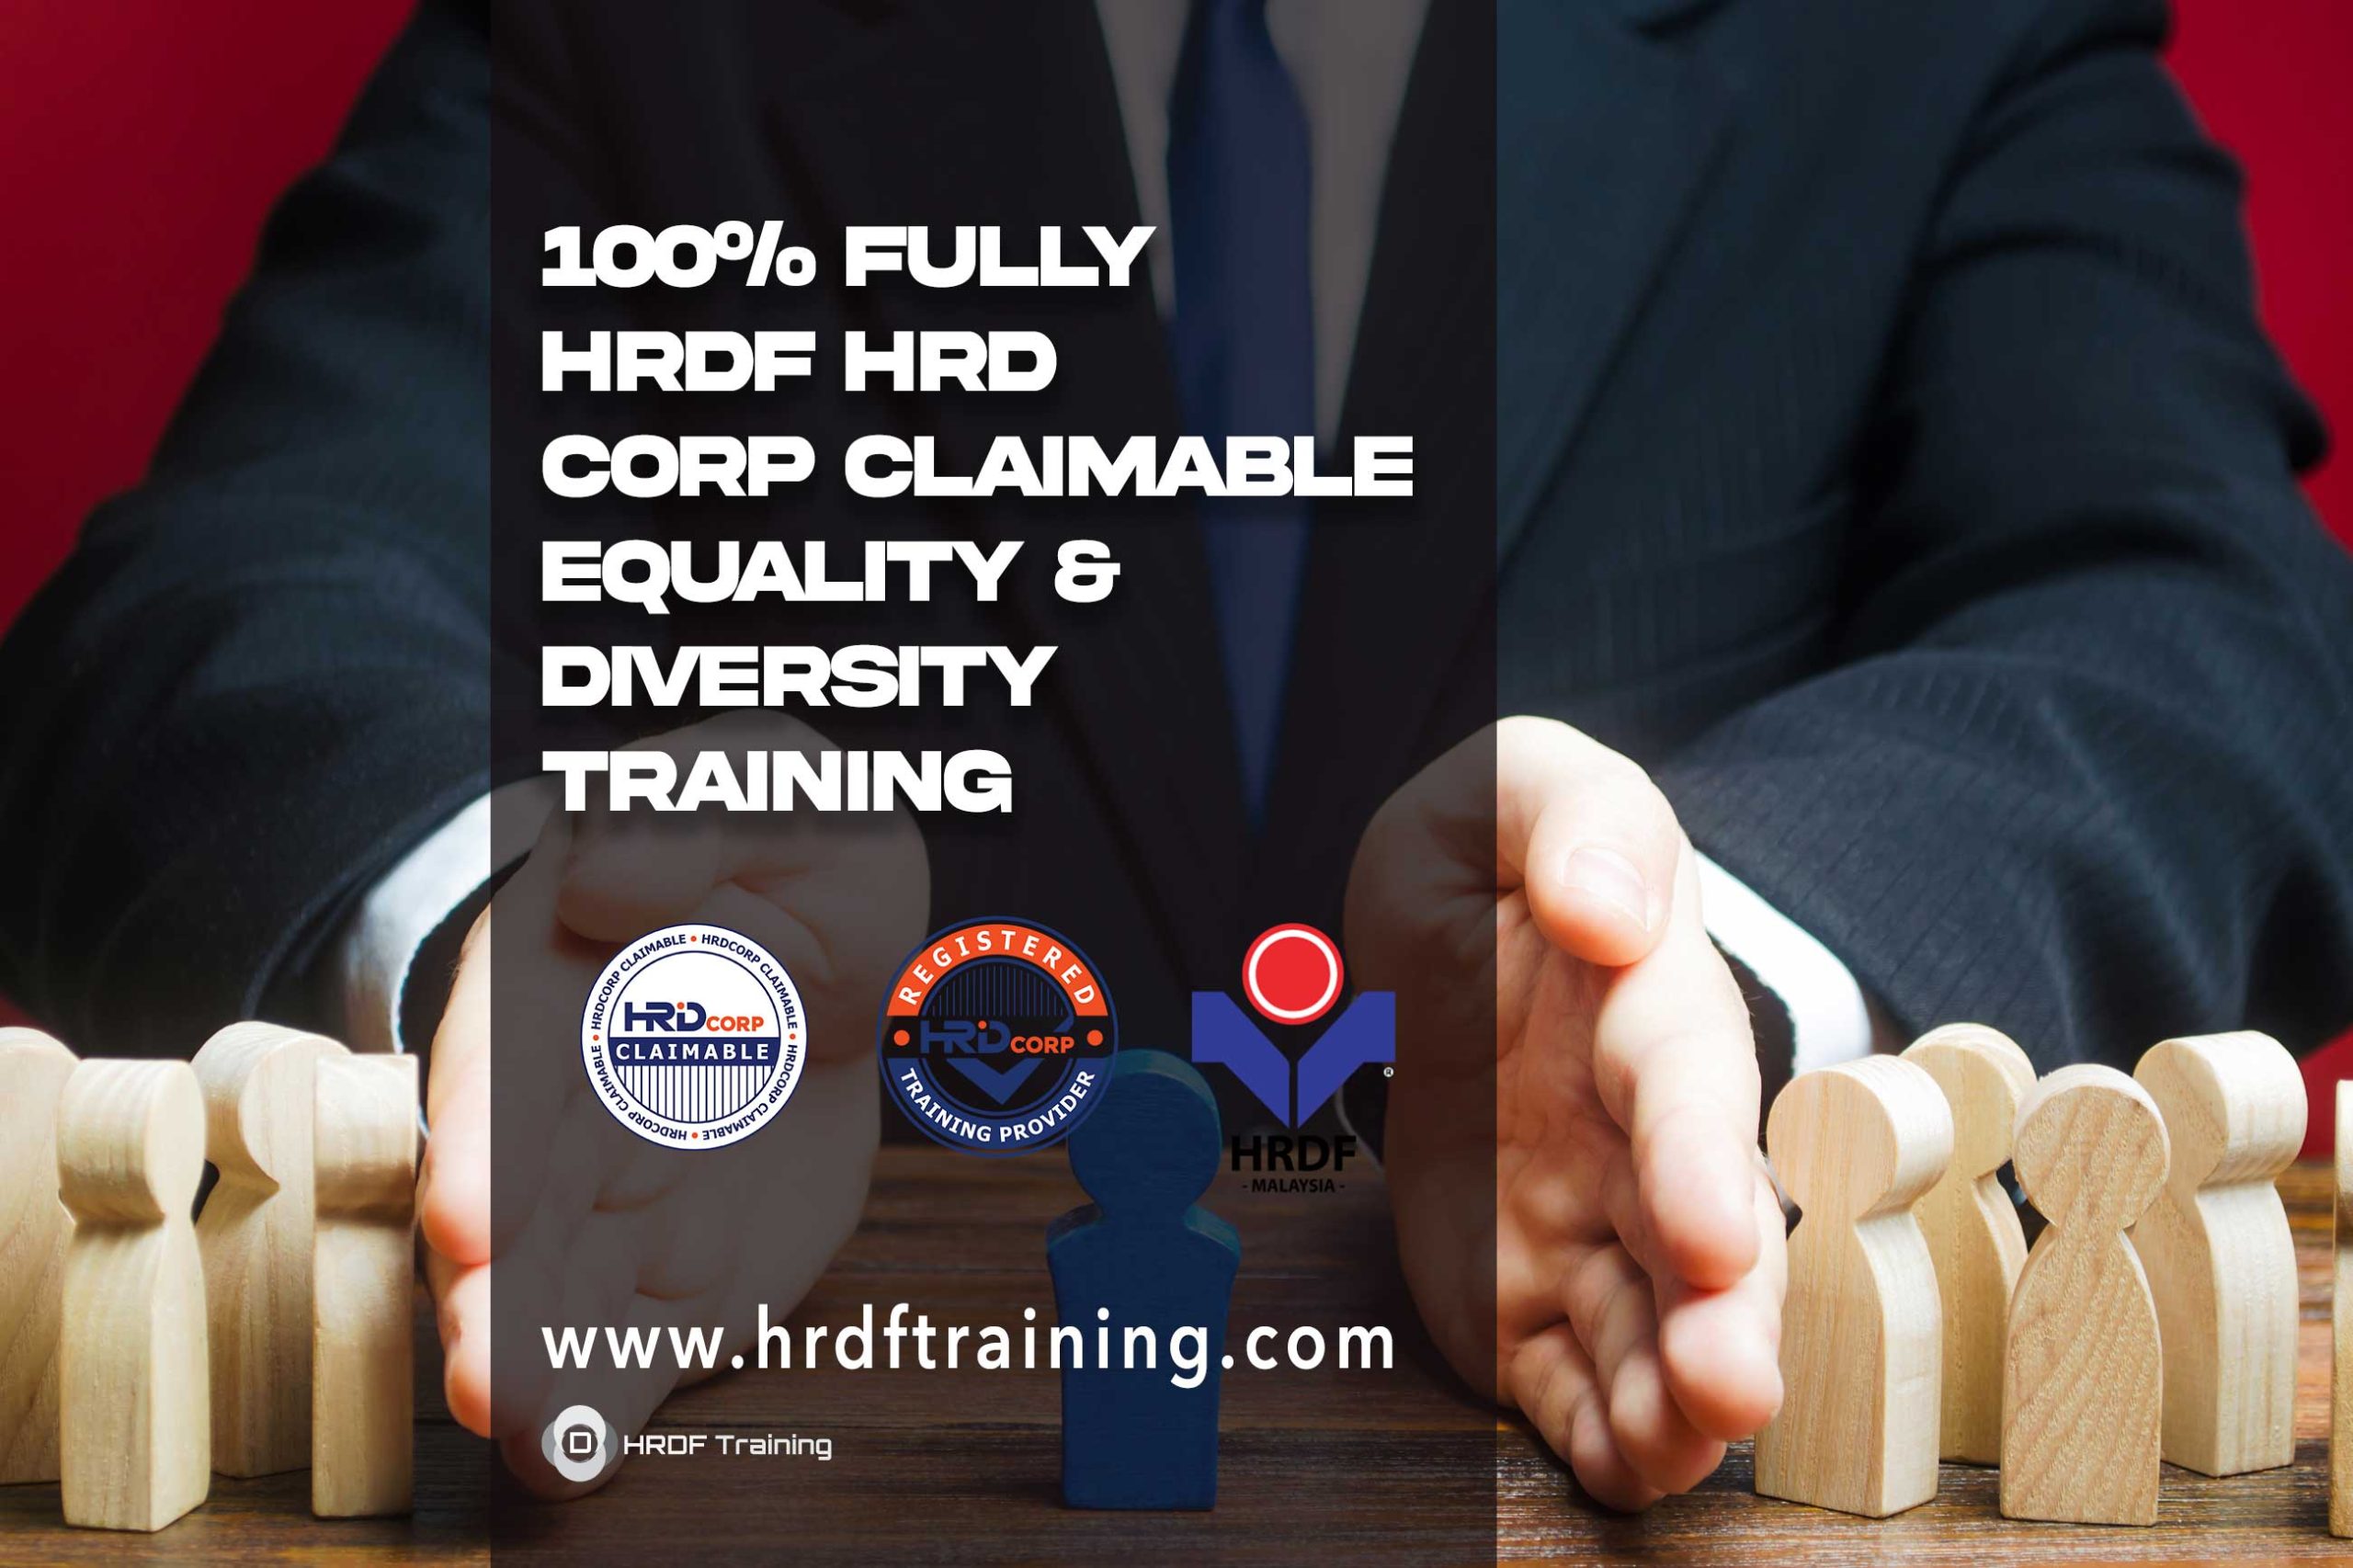 HRDF-HRD-Corp-Claimable-Equality-&-Diversity-Training